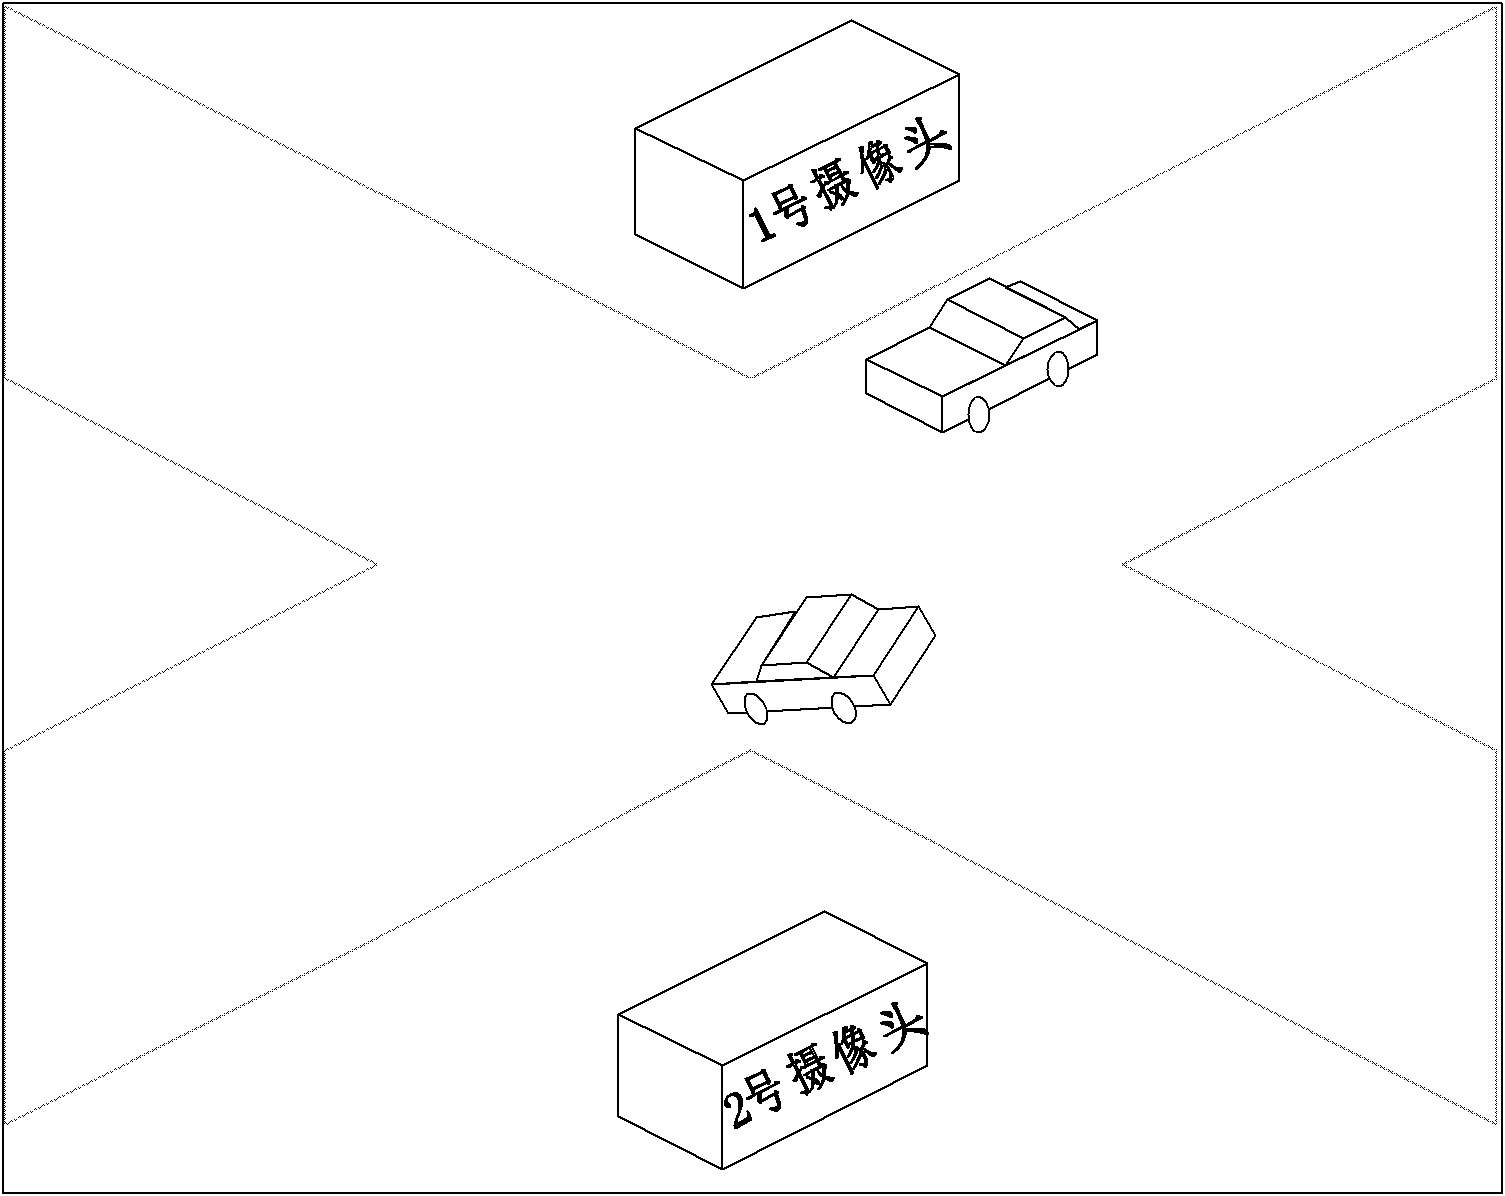 Method for detecting traffic conflicts at plane intersection based on video fusion